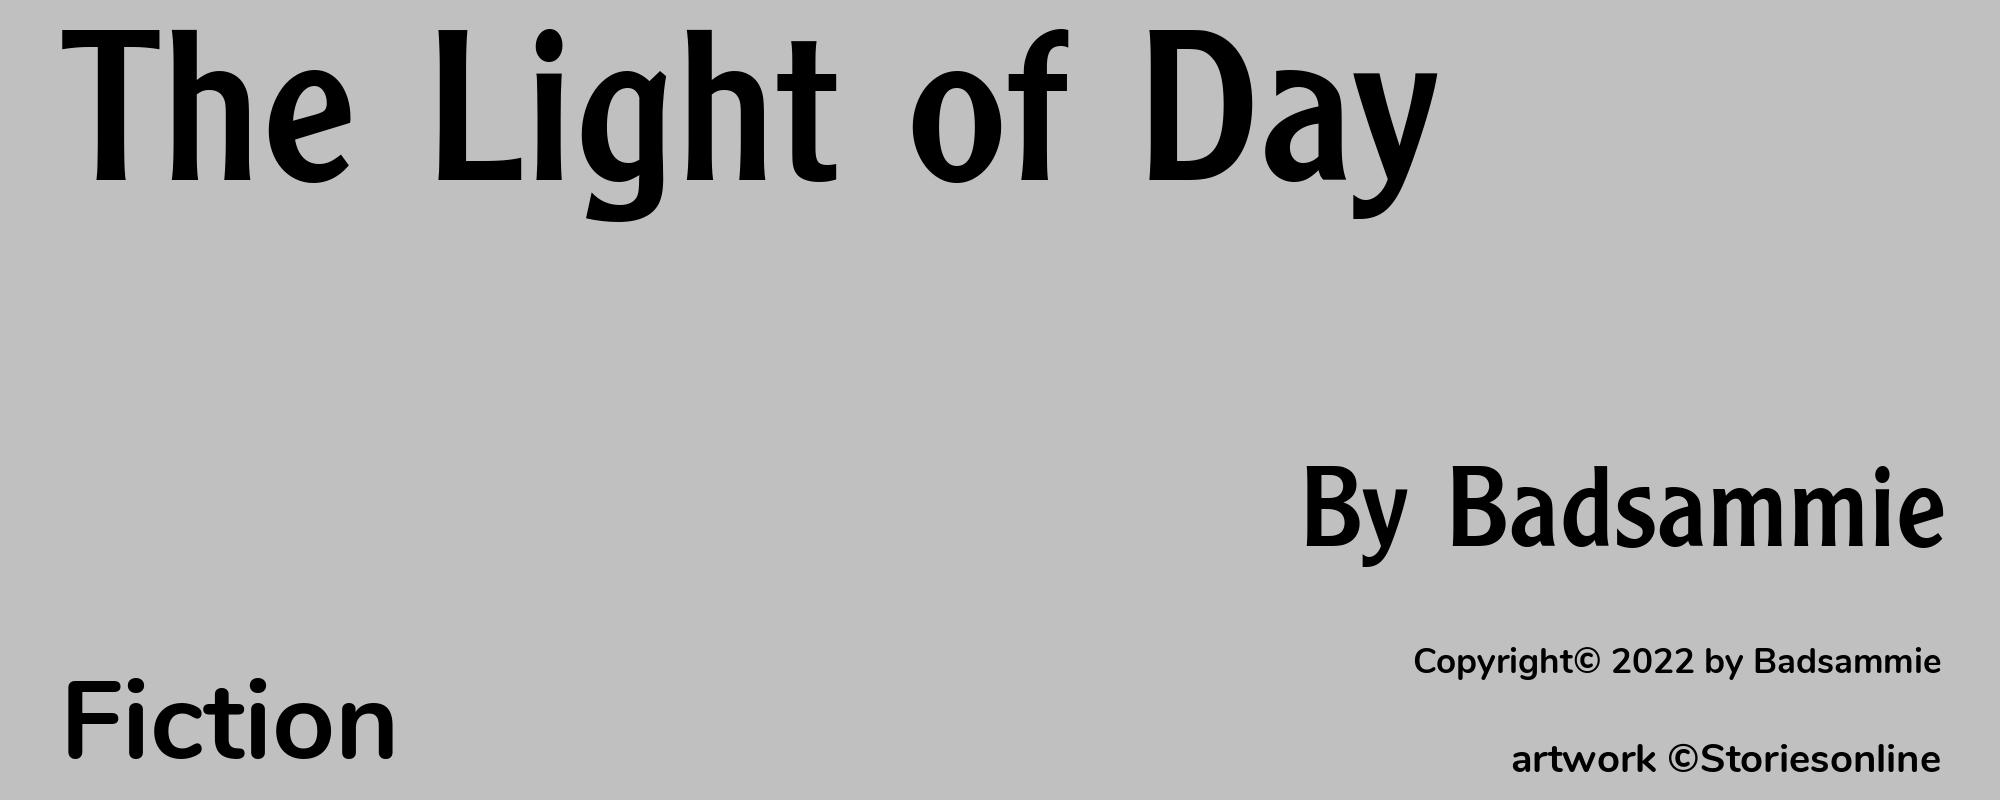 The Light of Day - Cover